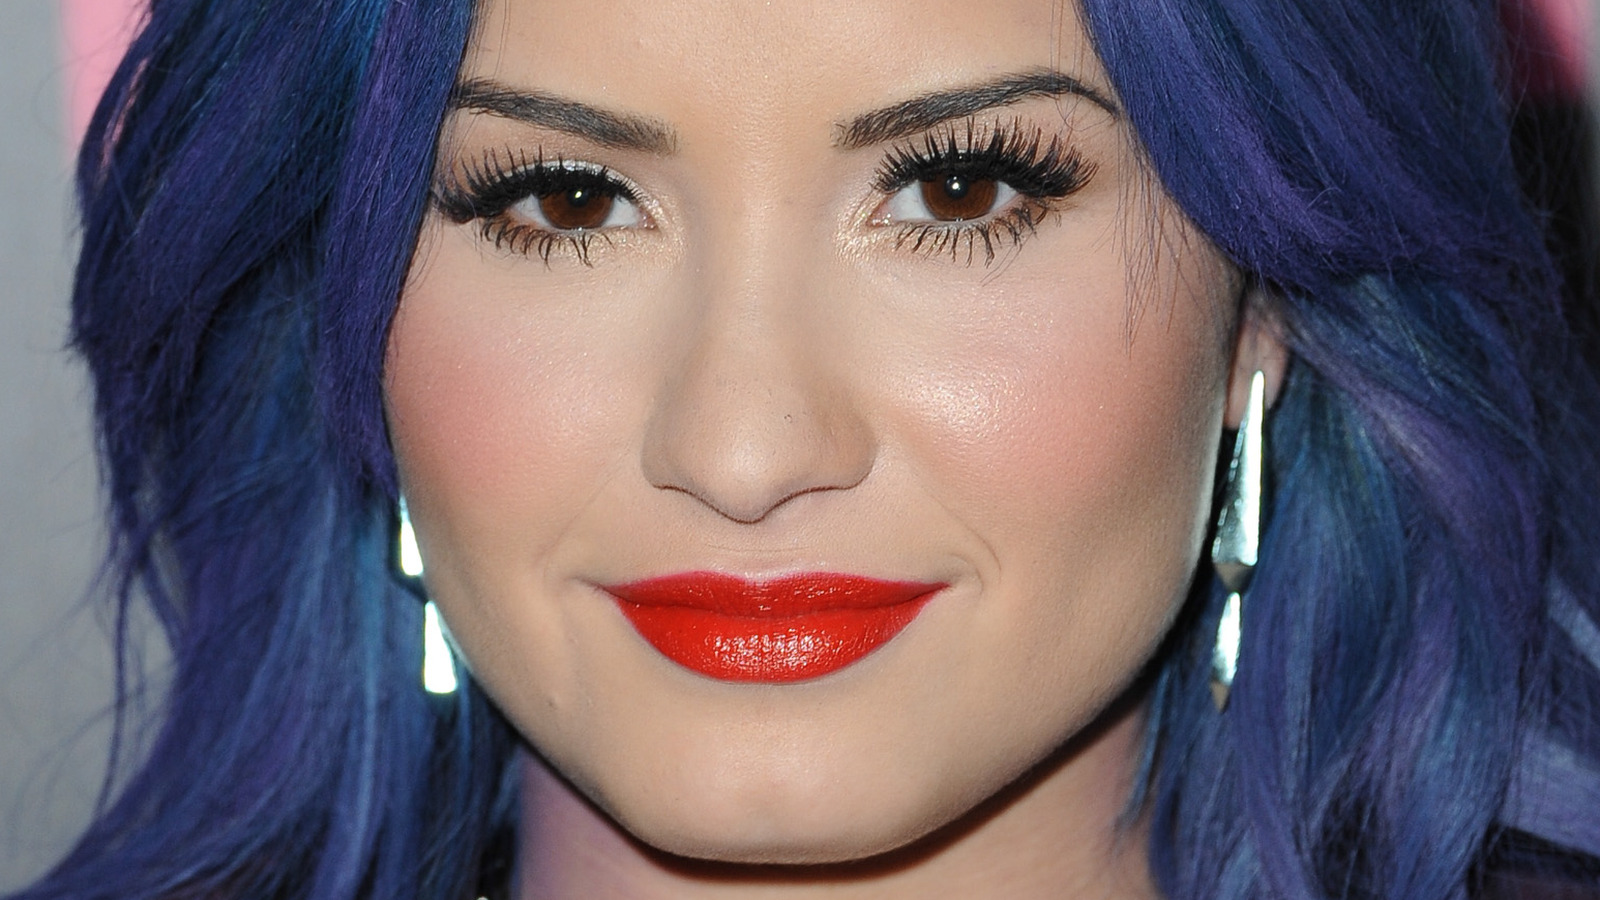 Blue hair: Celebrities who don't care about the haters - wide 5